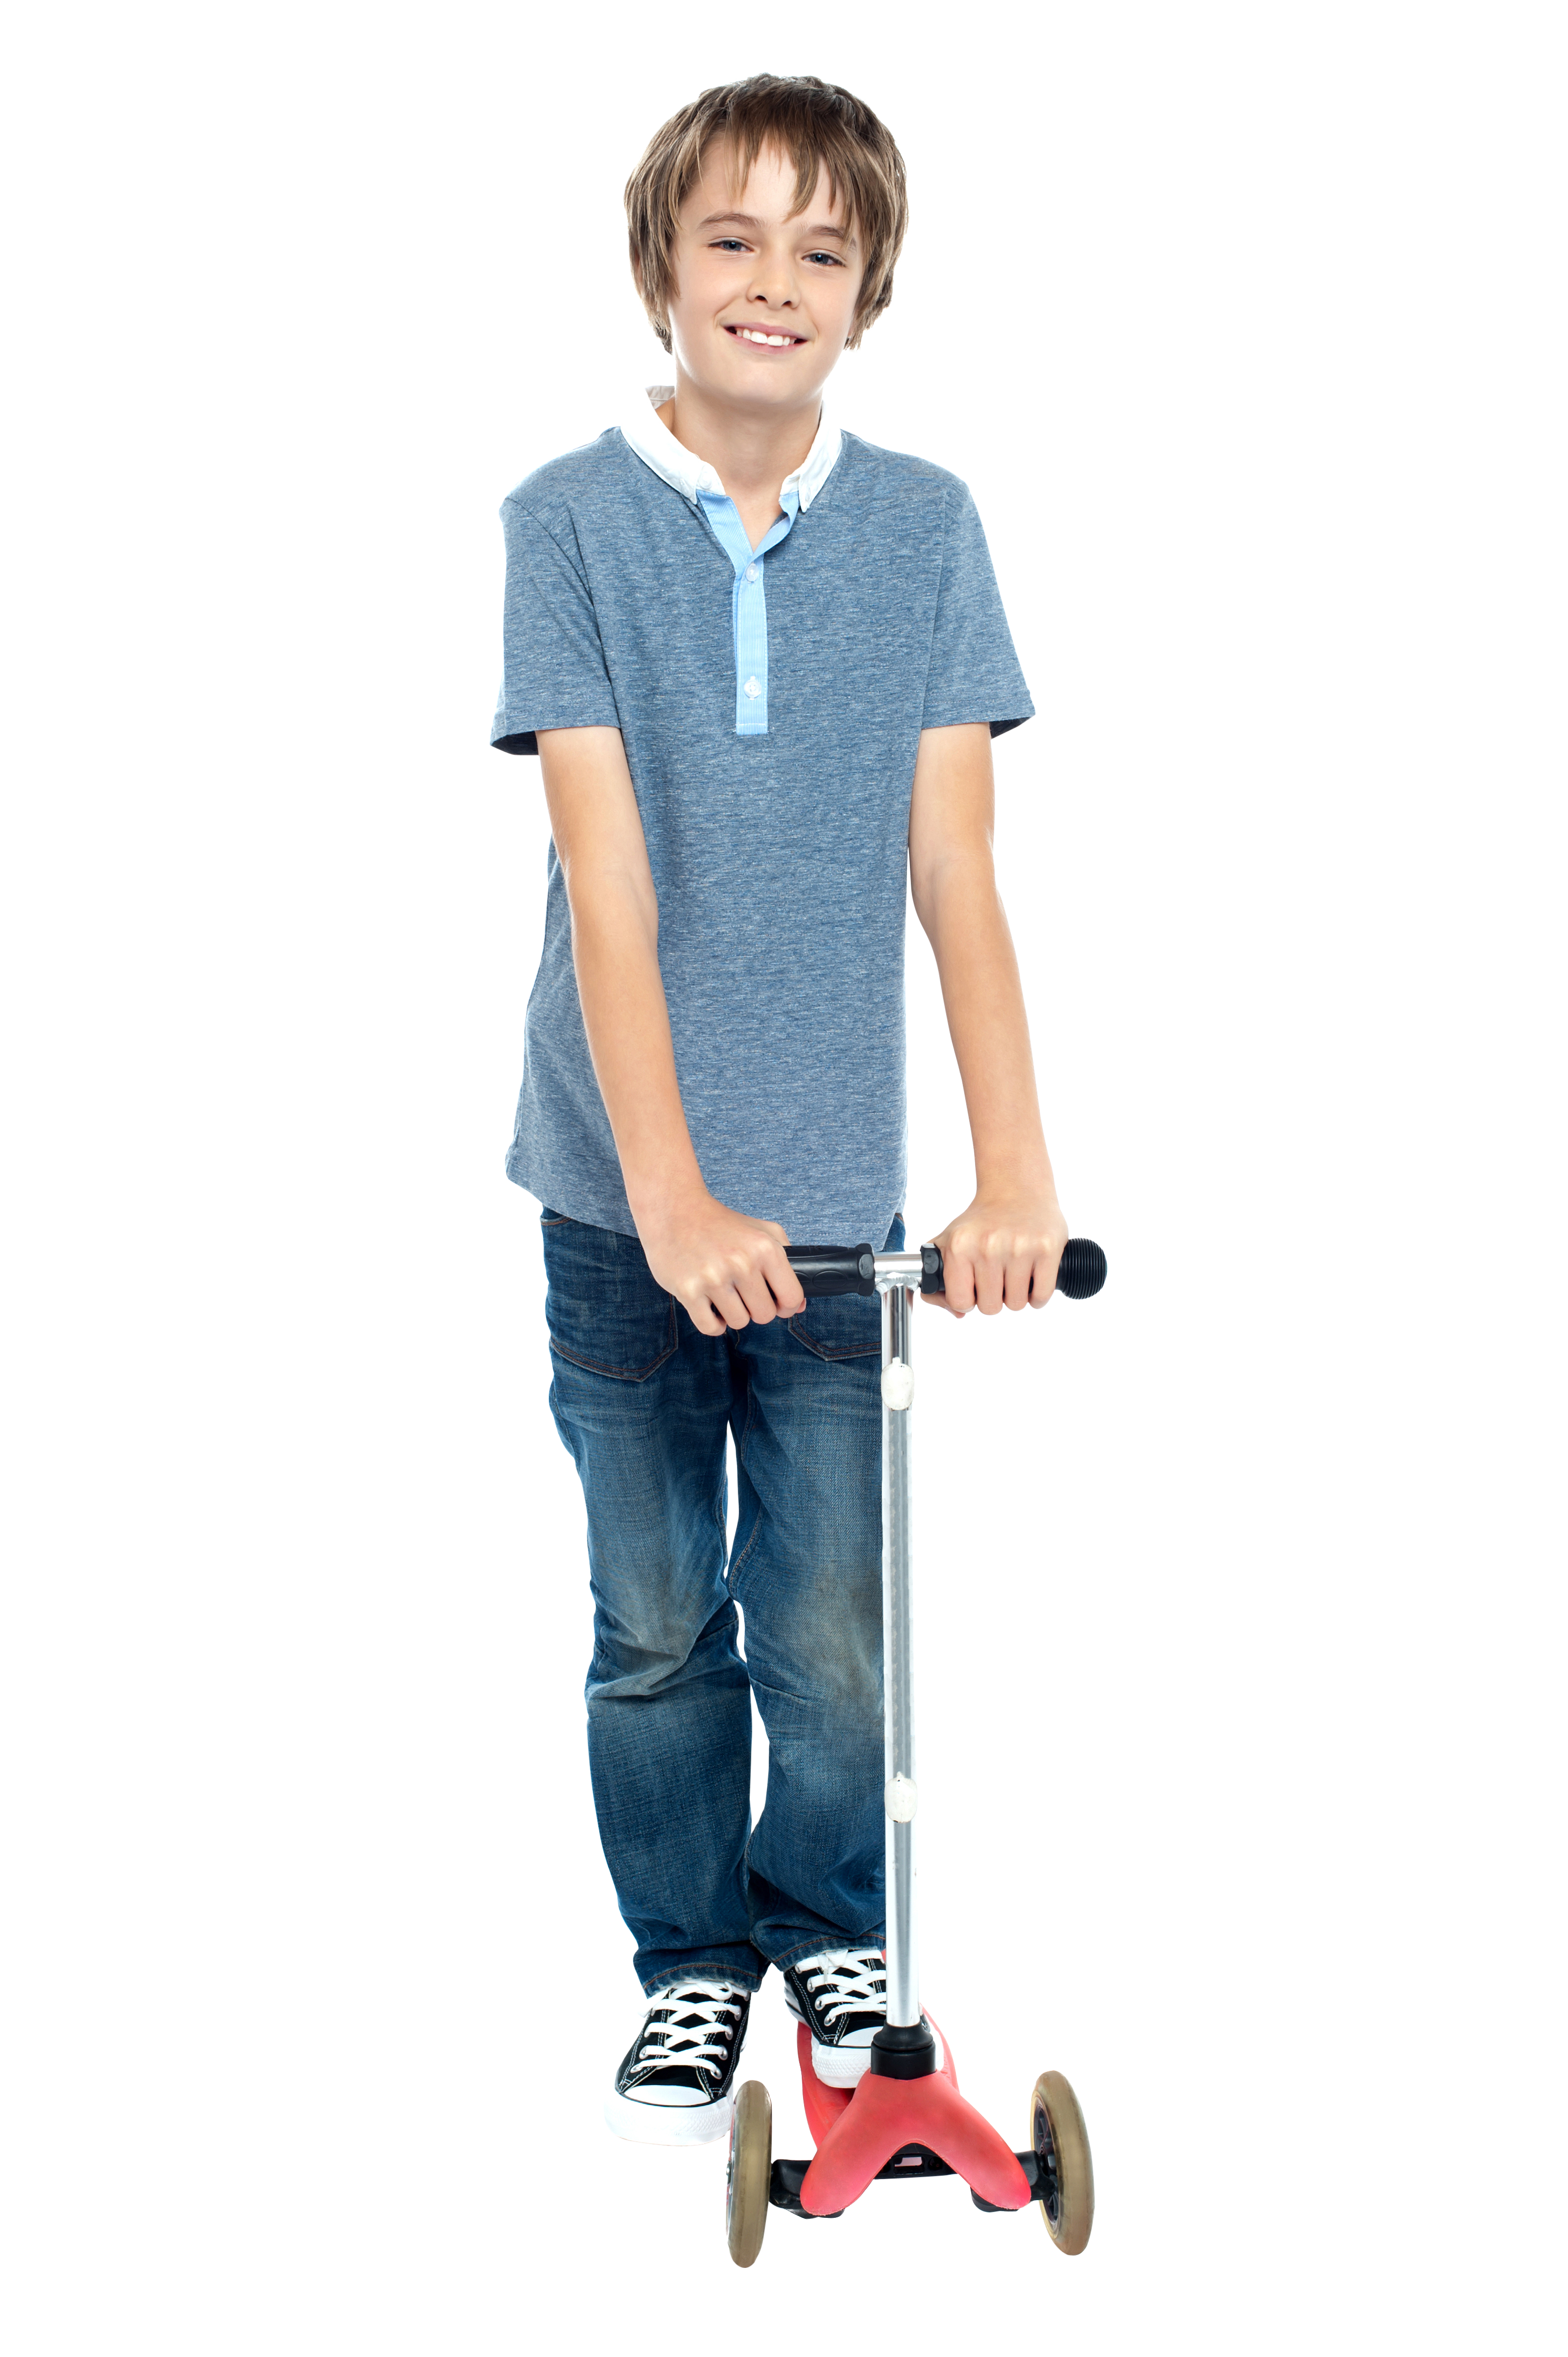 Download Boy PNG Image for Free